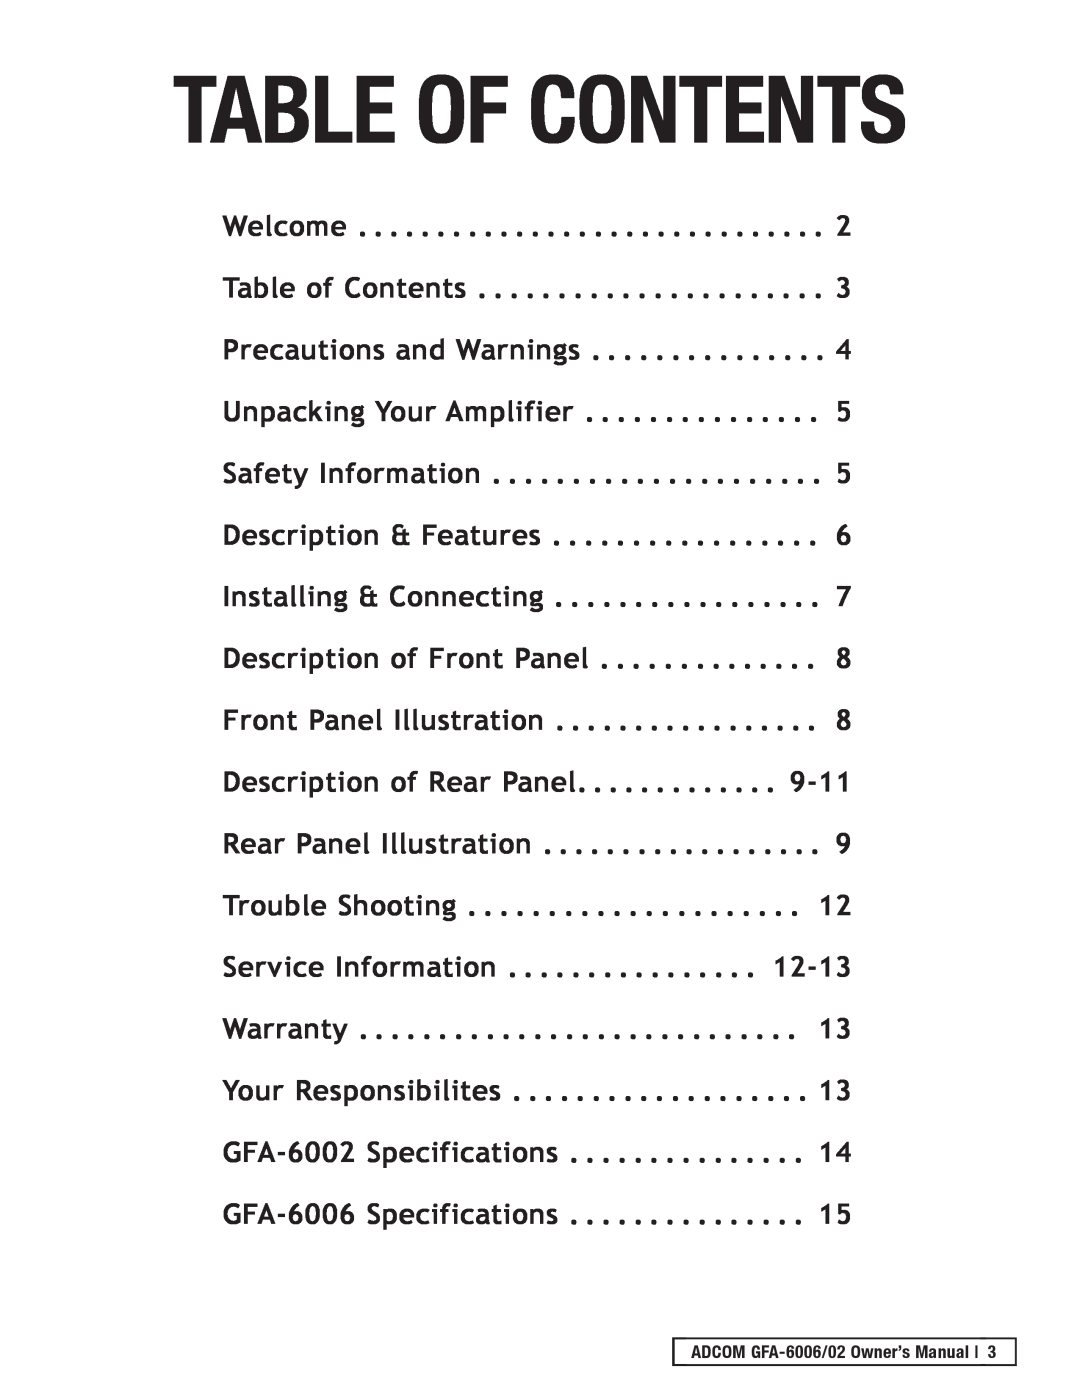 Adcom GFA-6006, GFA-6002 owner manual Table Of Contents 